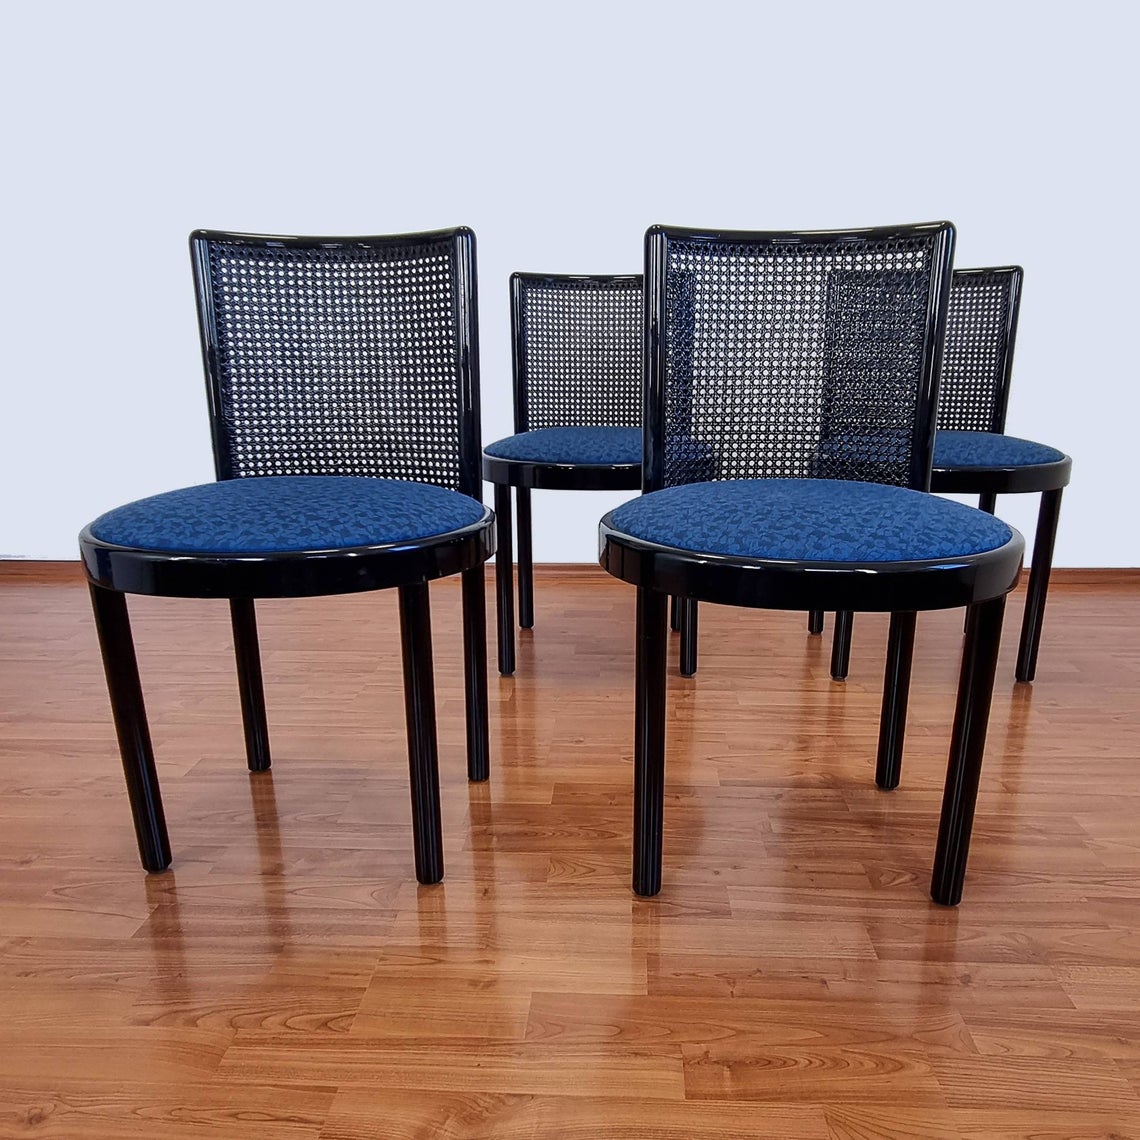 Set Of 4 Italian Dinning Chairs, Laquered Wood and Cane Chairs, Black Dinning Chairs, 80s